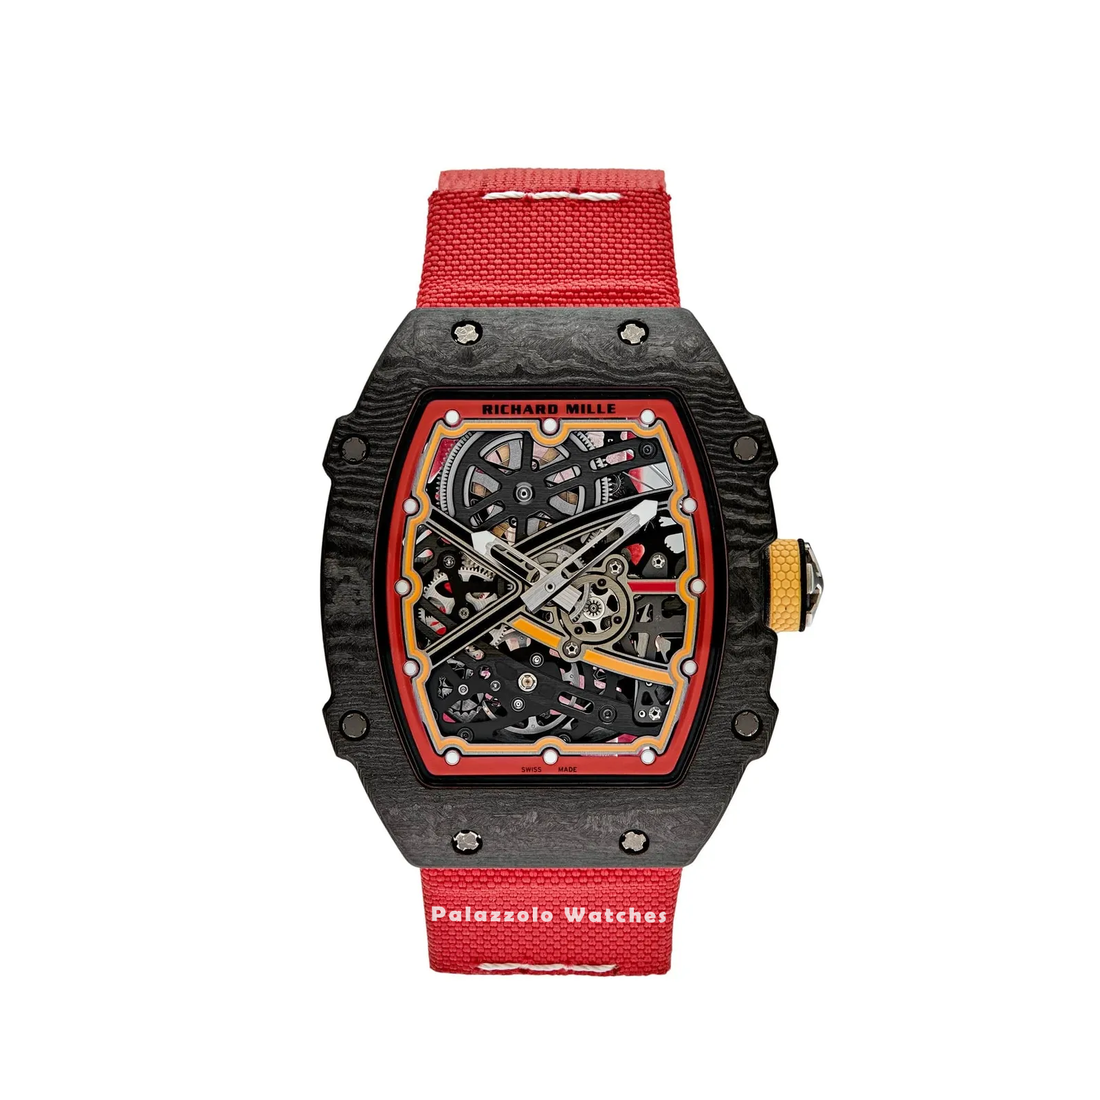 Richard Mille RM 67 Automatic Transparent 39 dial with Carbon case ref. RM67-02 - Palazzolo Watches